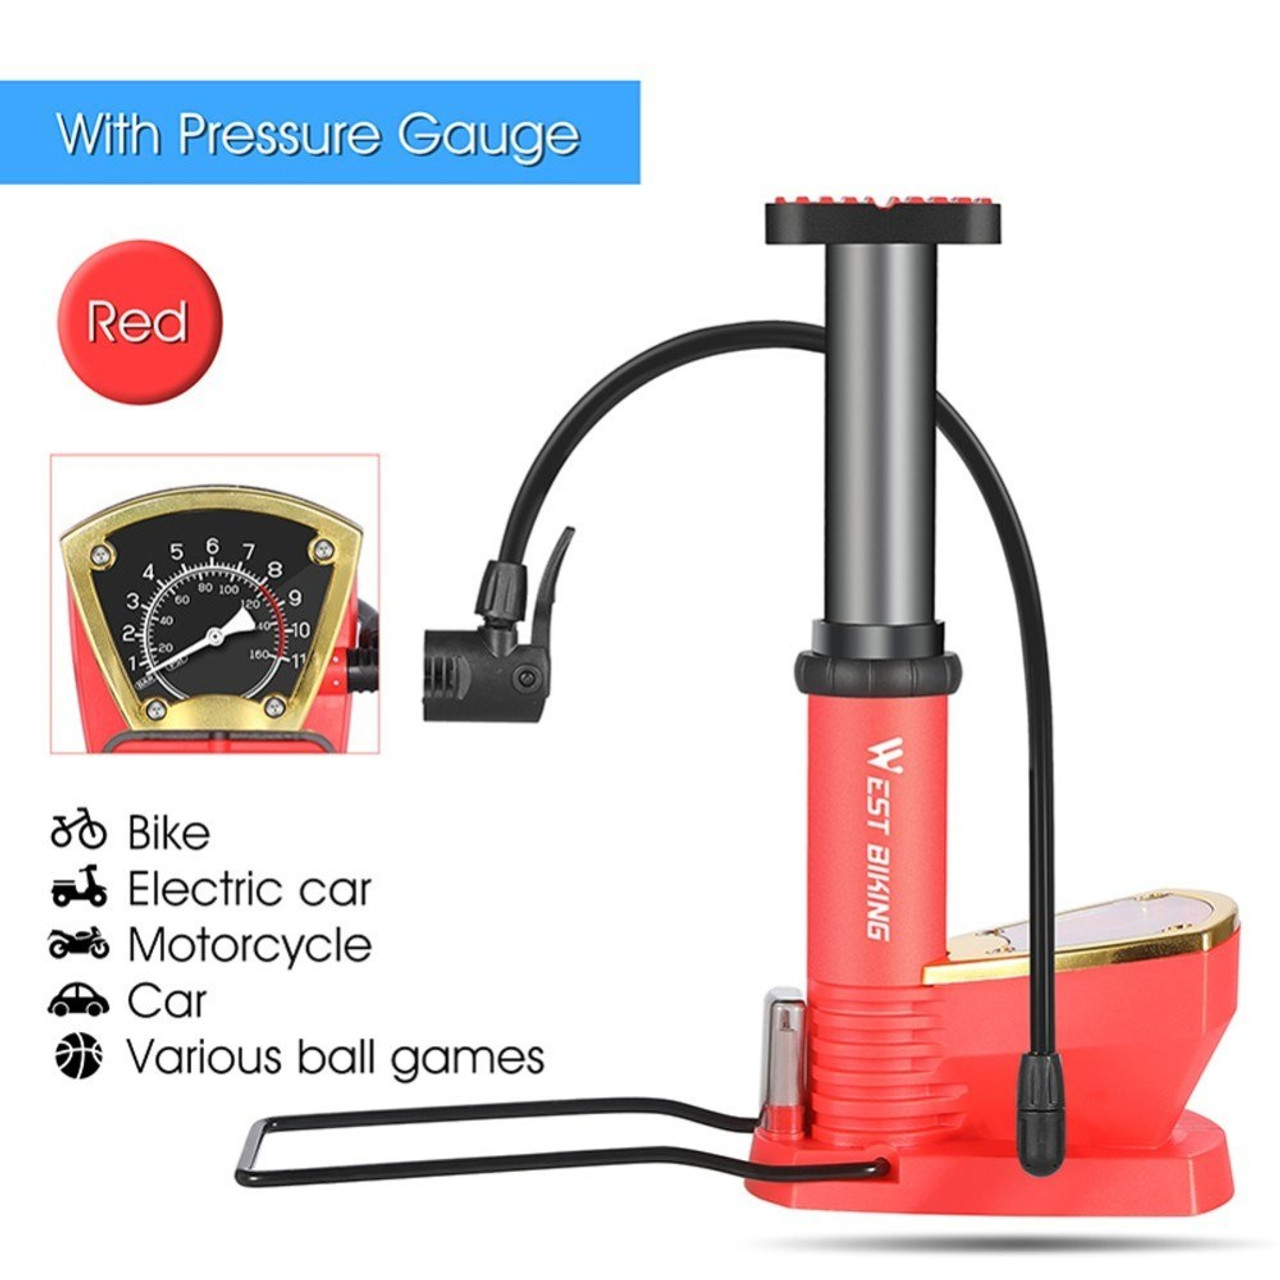 PSYCHE Foot Tyre Air pump for Ball, Car, Bicycle, Motorcycle and Balloon  Pump 100 PSI